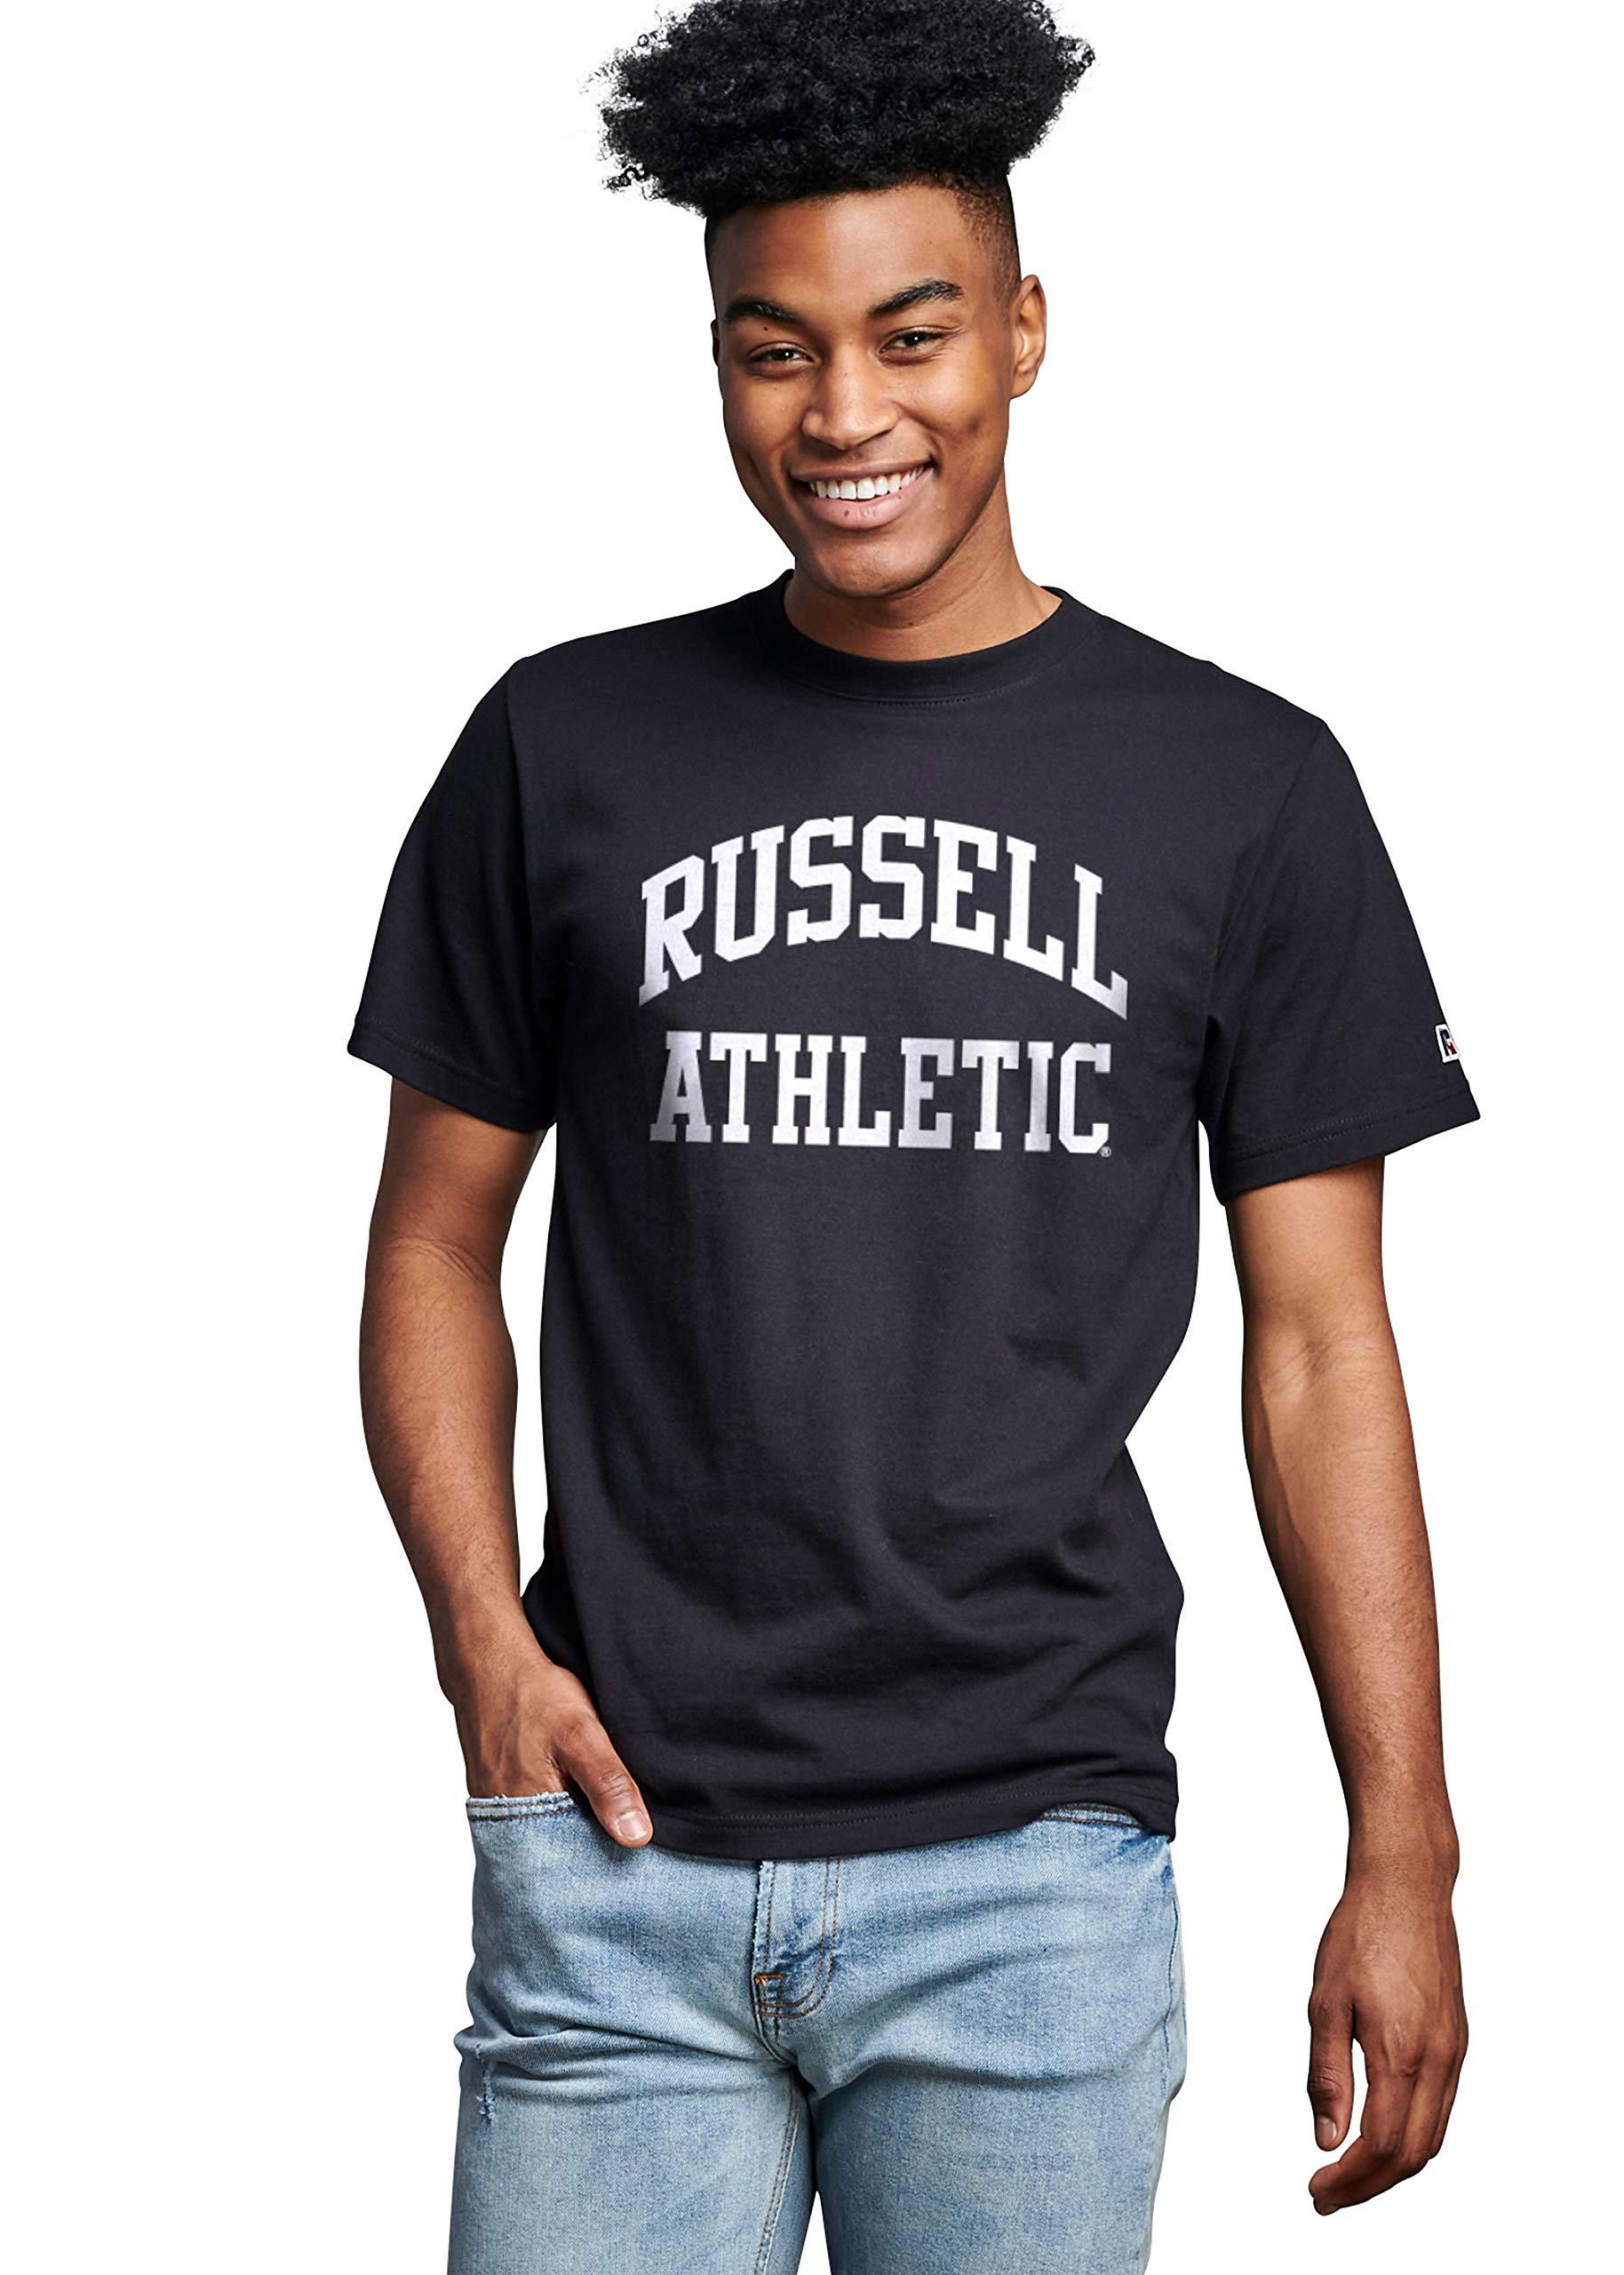 Russell Athletic Premium Cotton T-shirts in Black for Men - Lyst